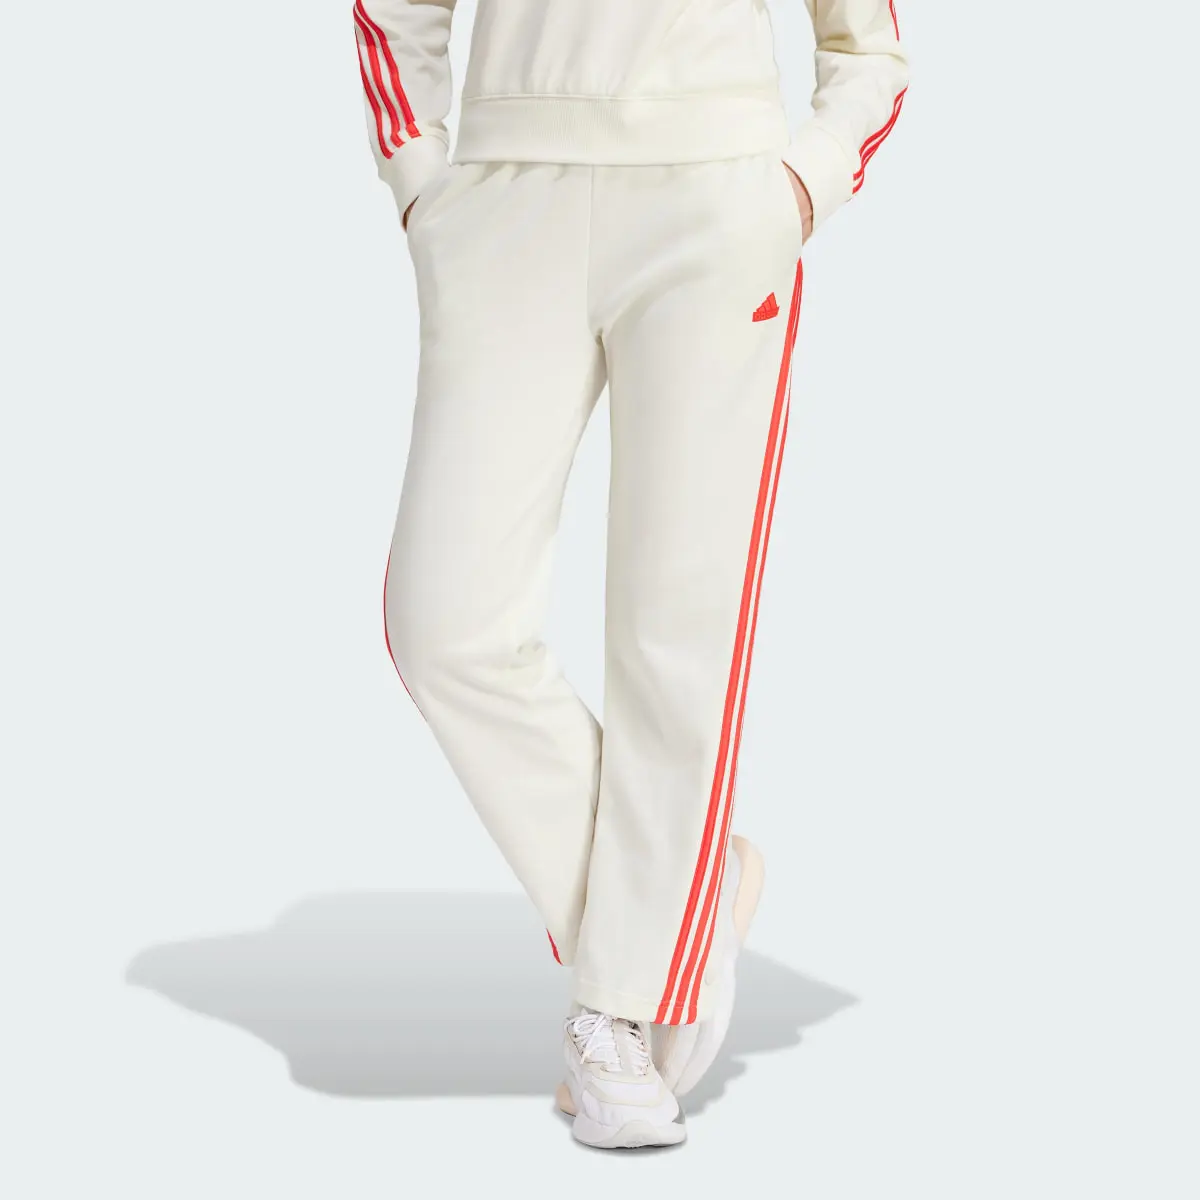 Adidas Iconic Wrapping 3-Stripes Snap Track Pants. 1